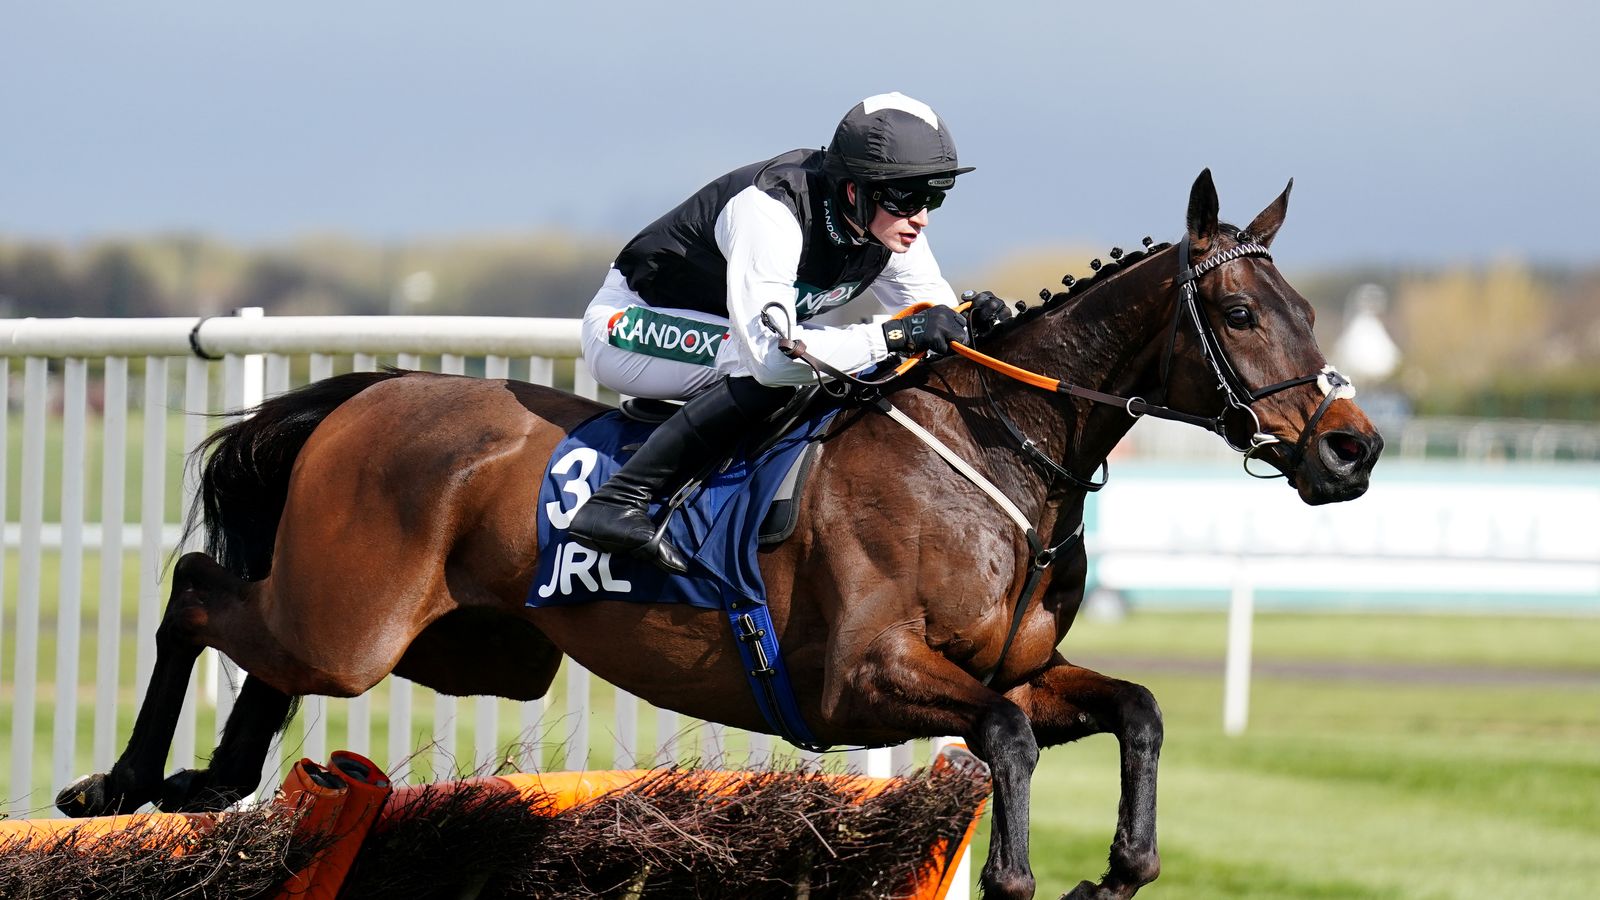 Grand National Festival: Three horses to follow including 12/1 shot at Aintree